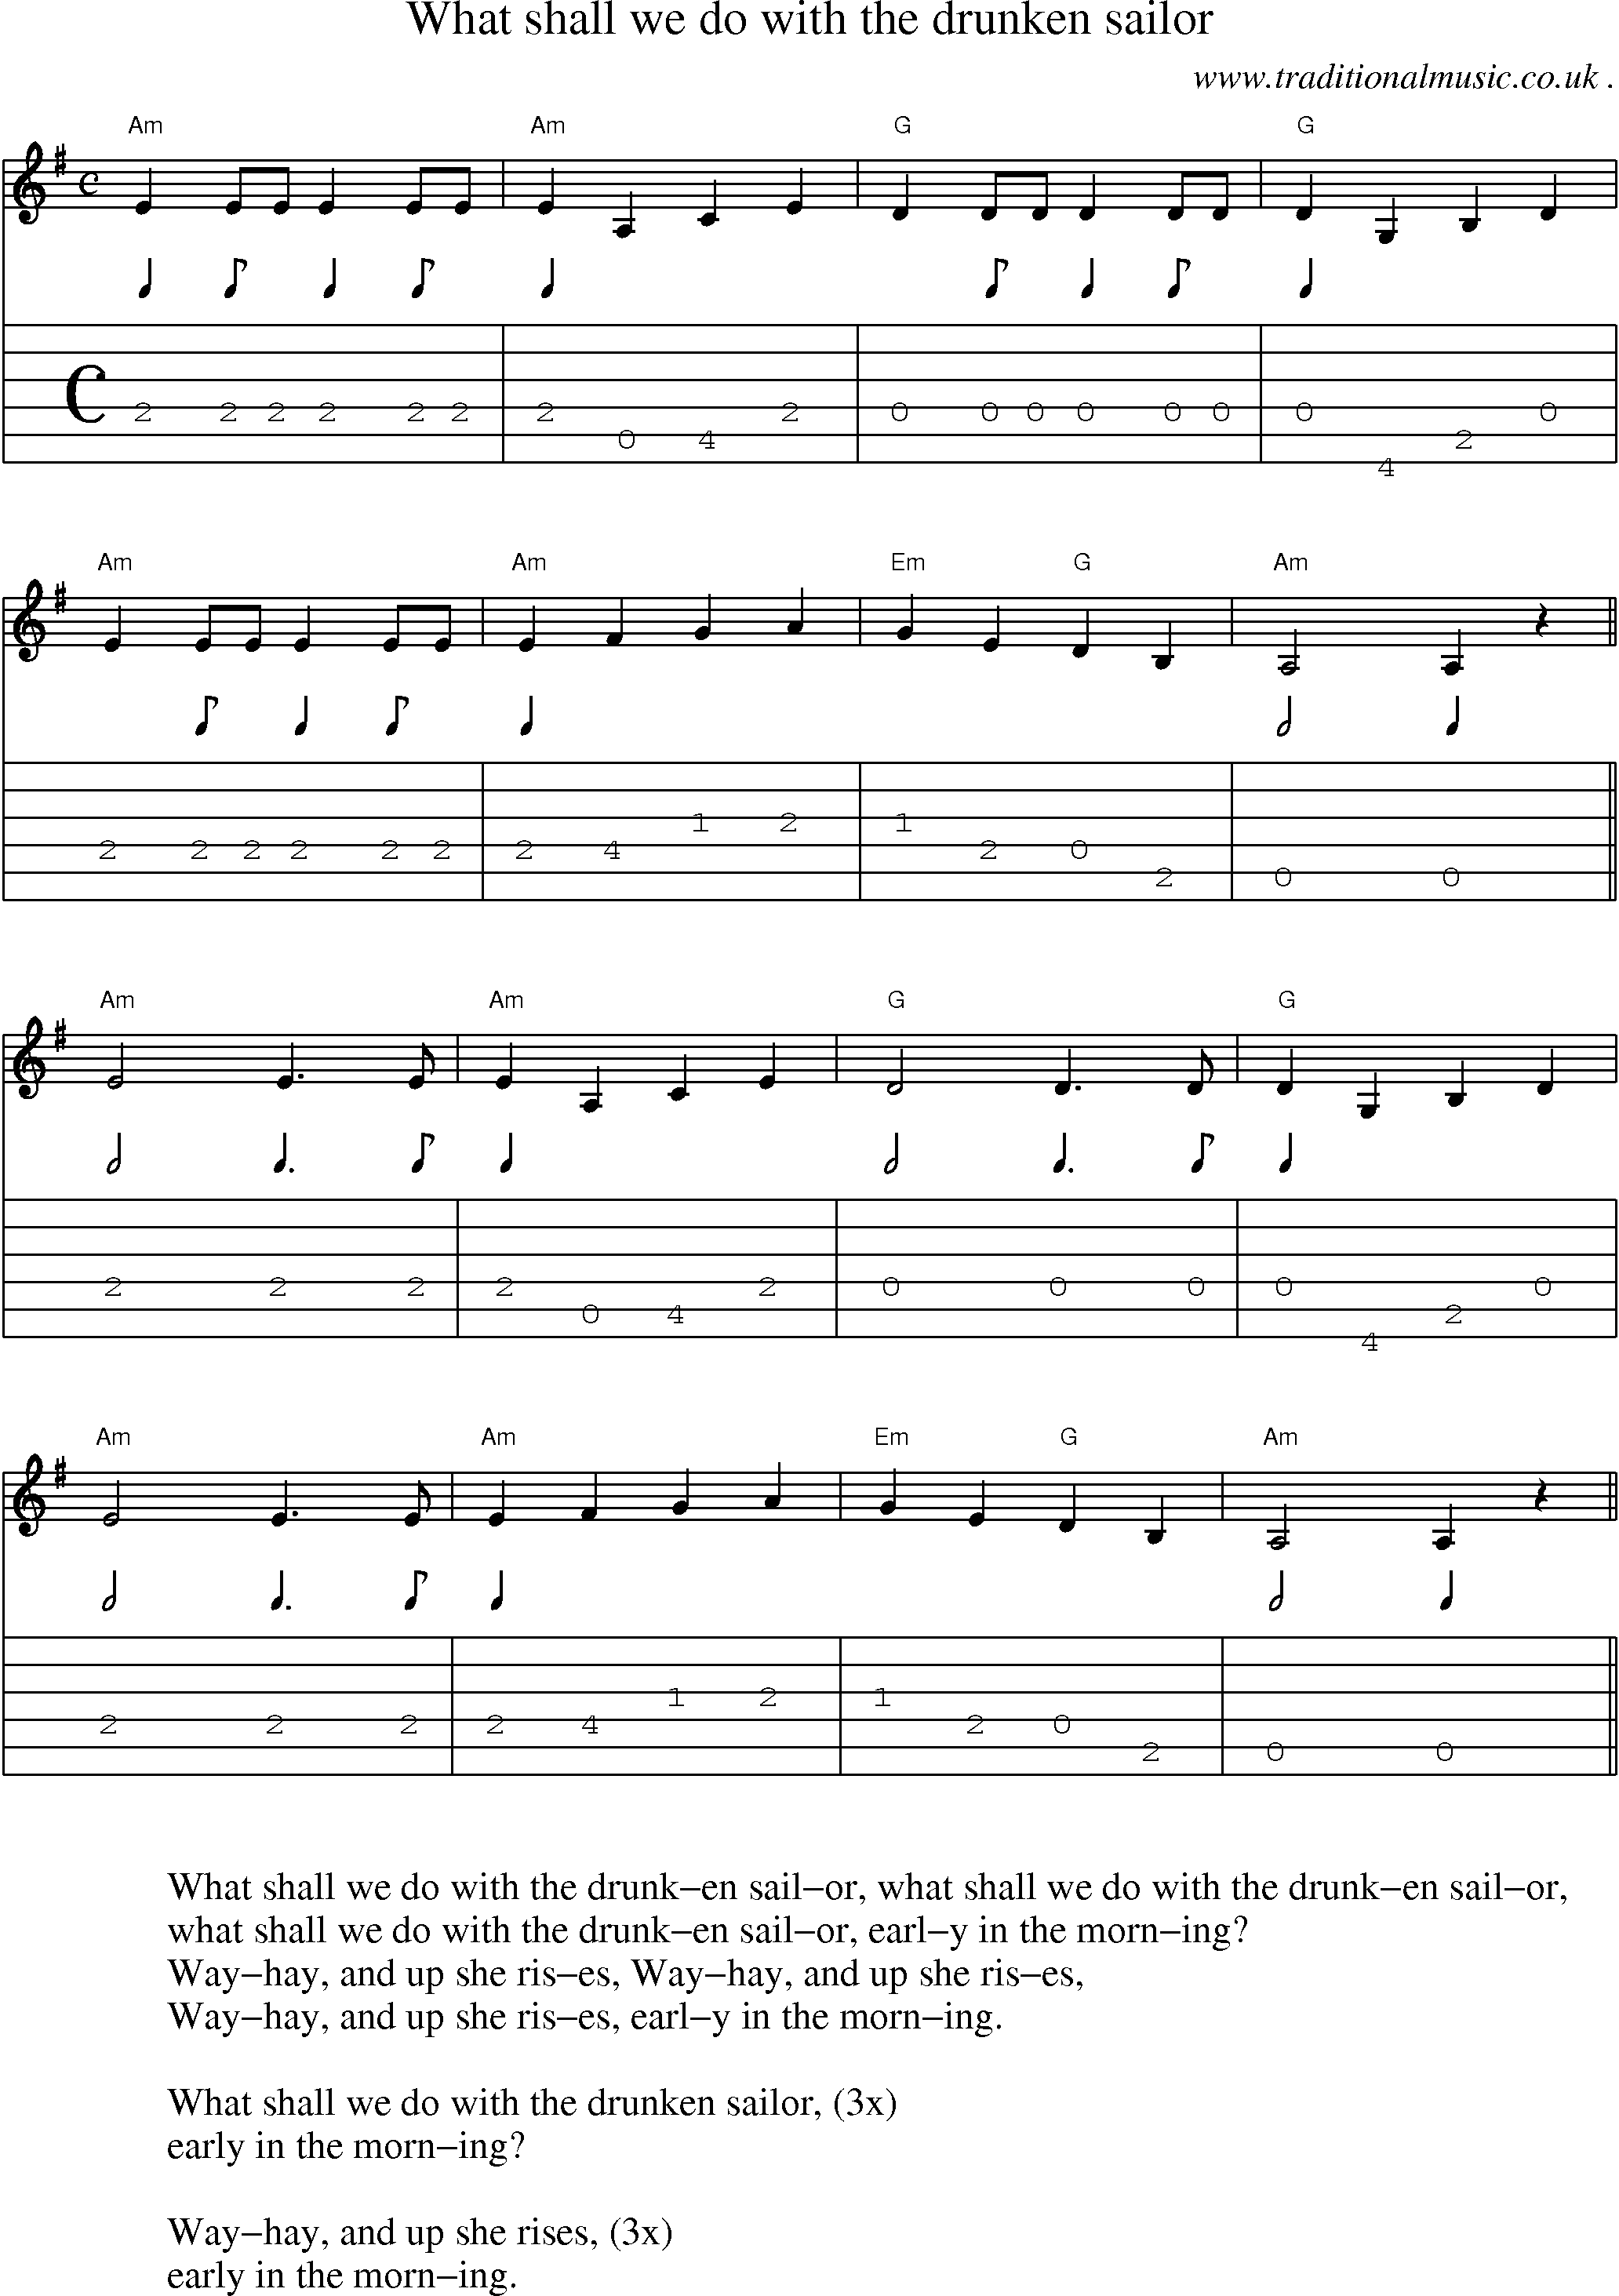 Sheet-Music and Guitar Tabs for What Shall We Do With The Drunken Sailor